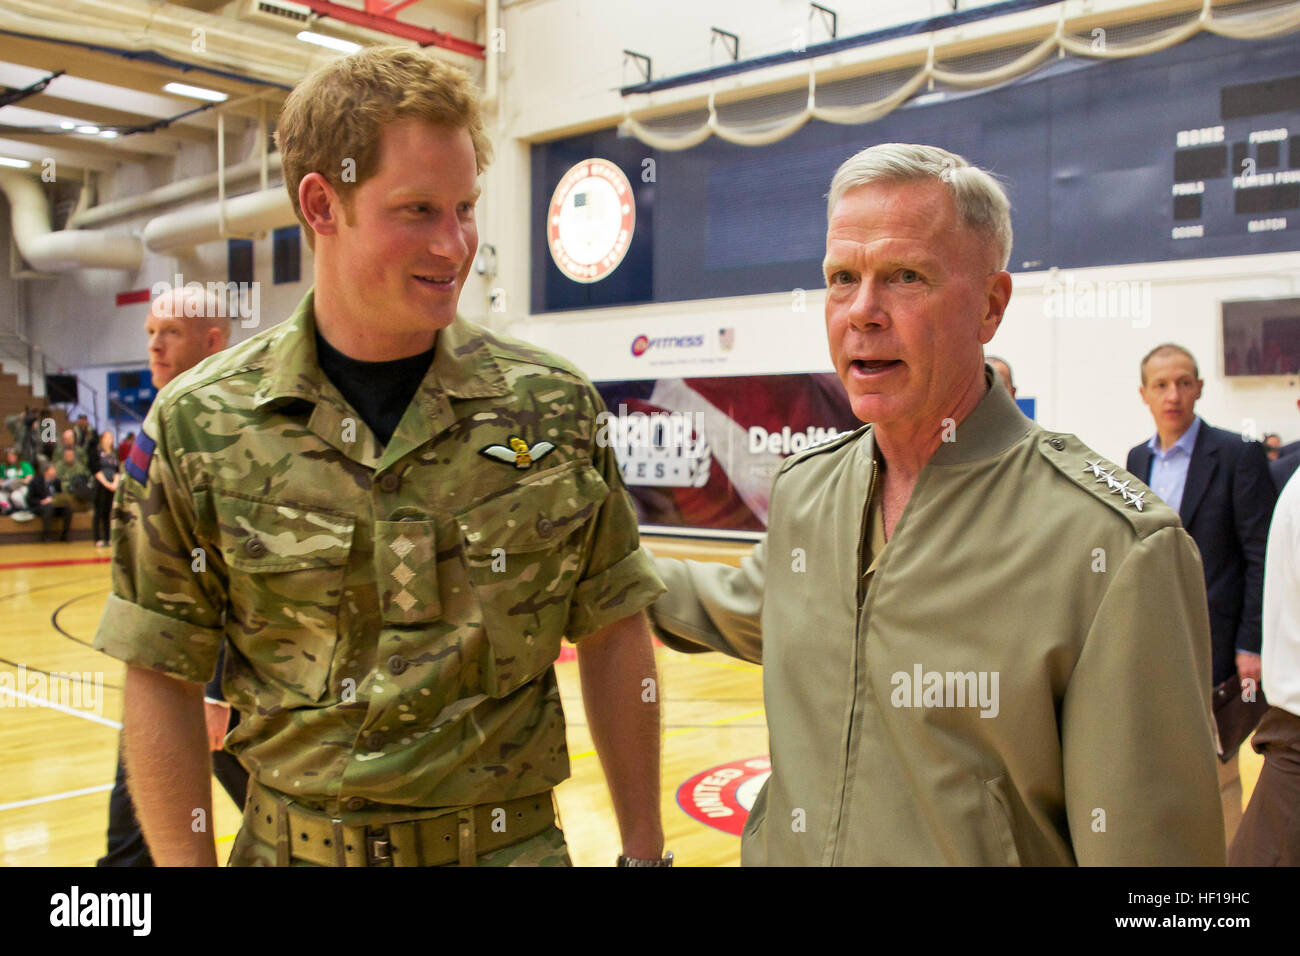 The 35th Commandant of the Marine Corps, Gen. James F. Amos, right, speaks with Prince Harry of Wales at the 2013 Wounded Warrior Games at the U.S. Olympic Training Center in Colorado Springs, CO., May 11, 2013. The Warrior Games, an annual event which is a partnership between the Department of Defense and U.S. Olympic Committee Paralympic Military Program, allows wounded, injured and ill athletes from all branches of the military to compete in organized sporting competitions. (U.S. Marine Corps photo by Sgt. Mallory S. VanderSchans/Released) Marine Corps commandant at 2013 Warrior Games 13051 Stock Photo